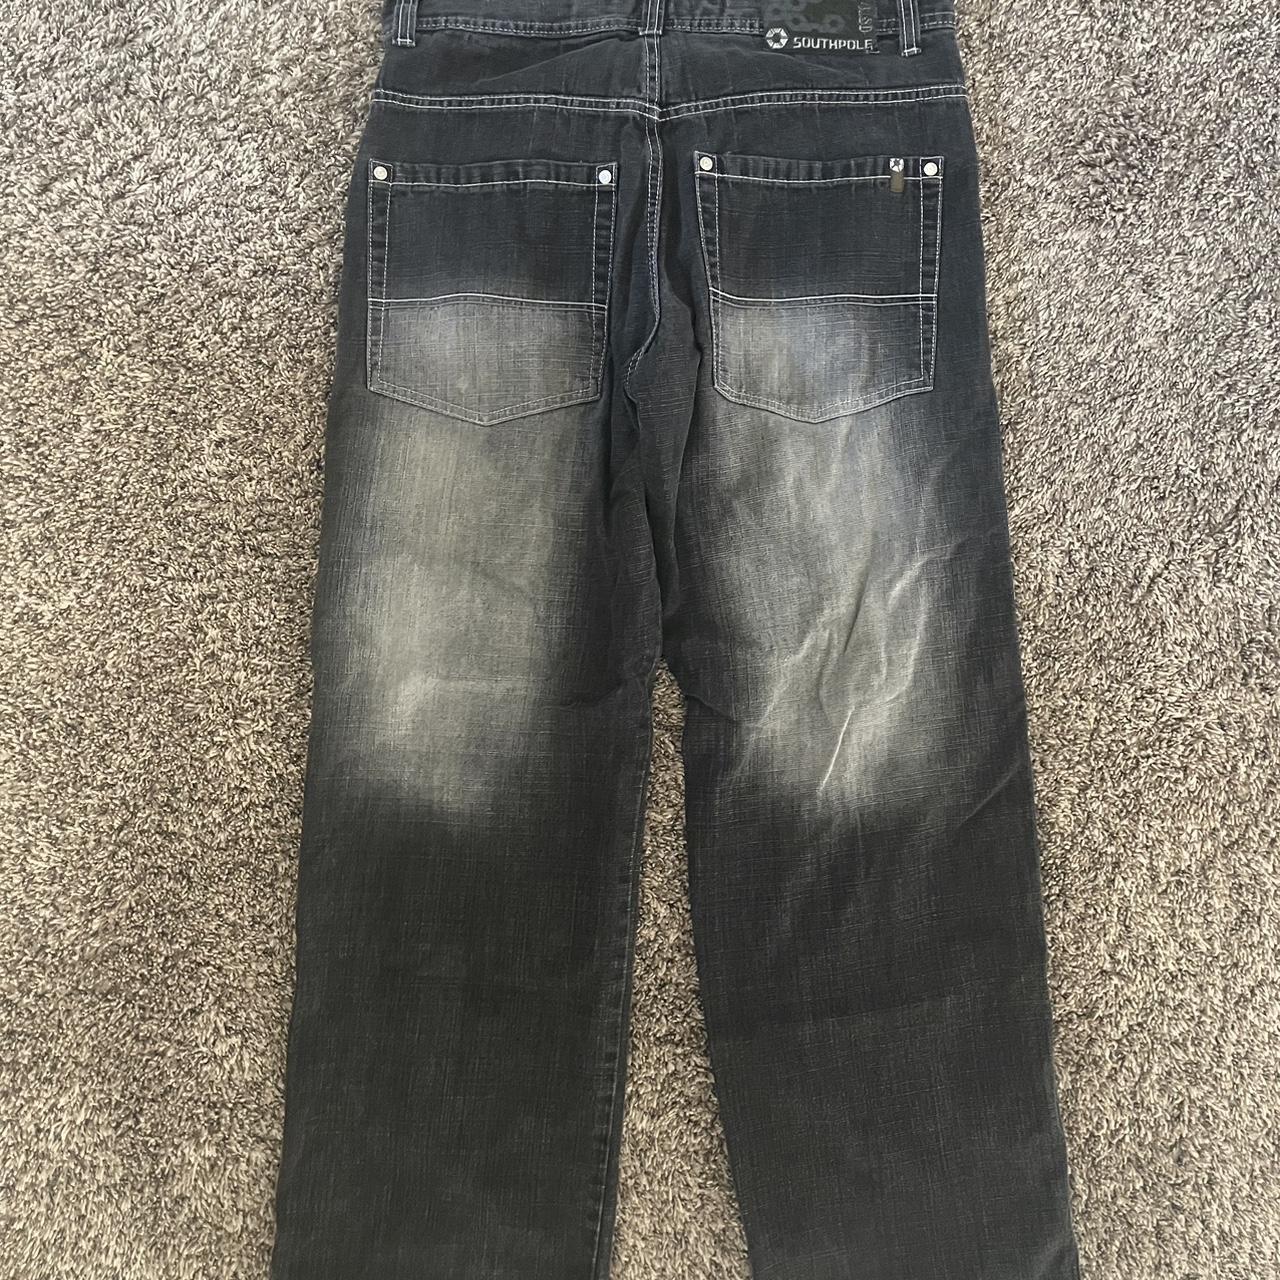 Southpole Jeans Super Sick Fade Great Condtion Only... - Depop